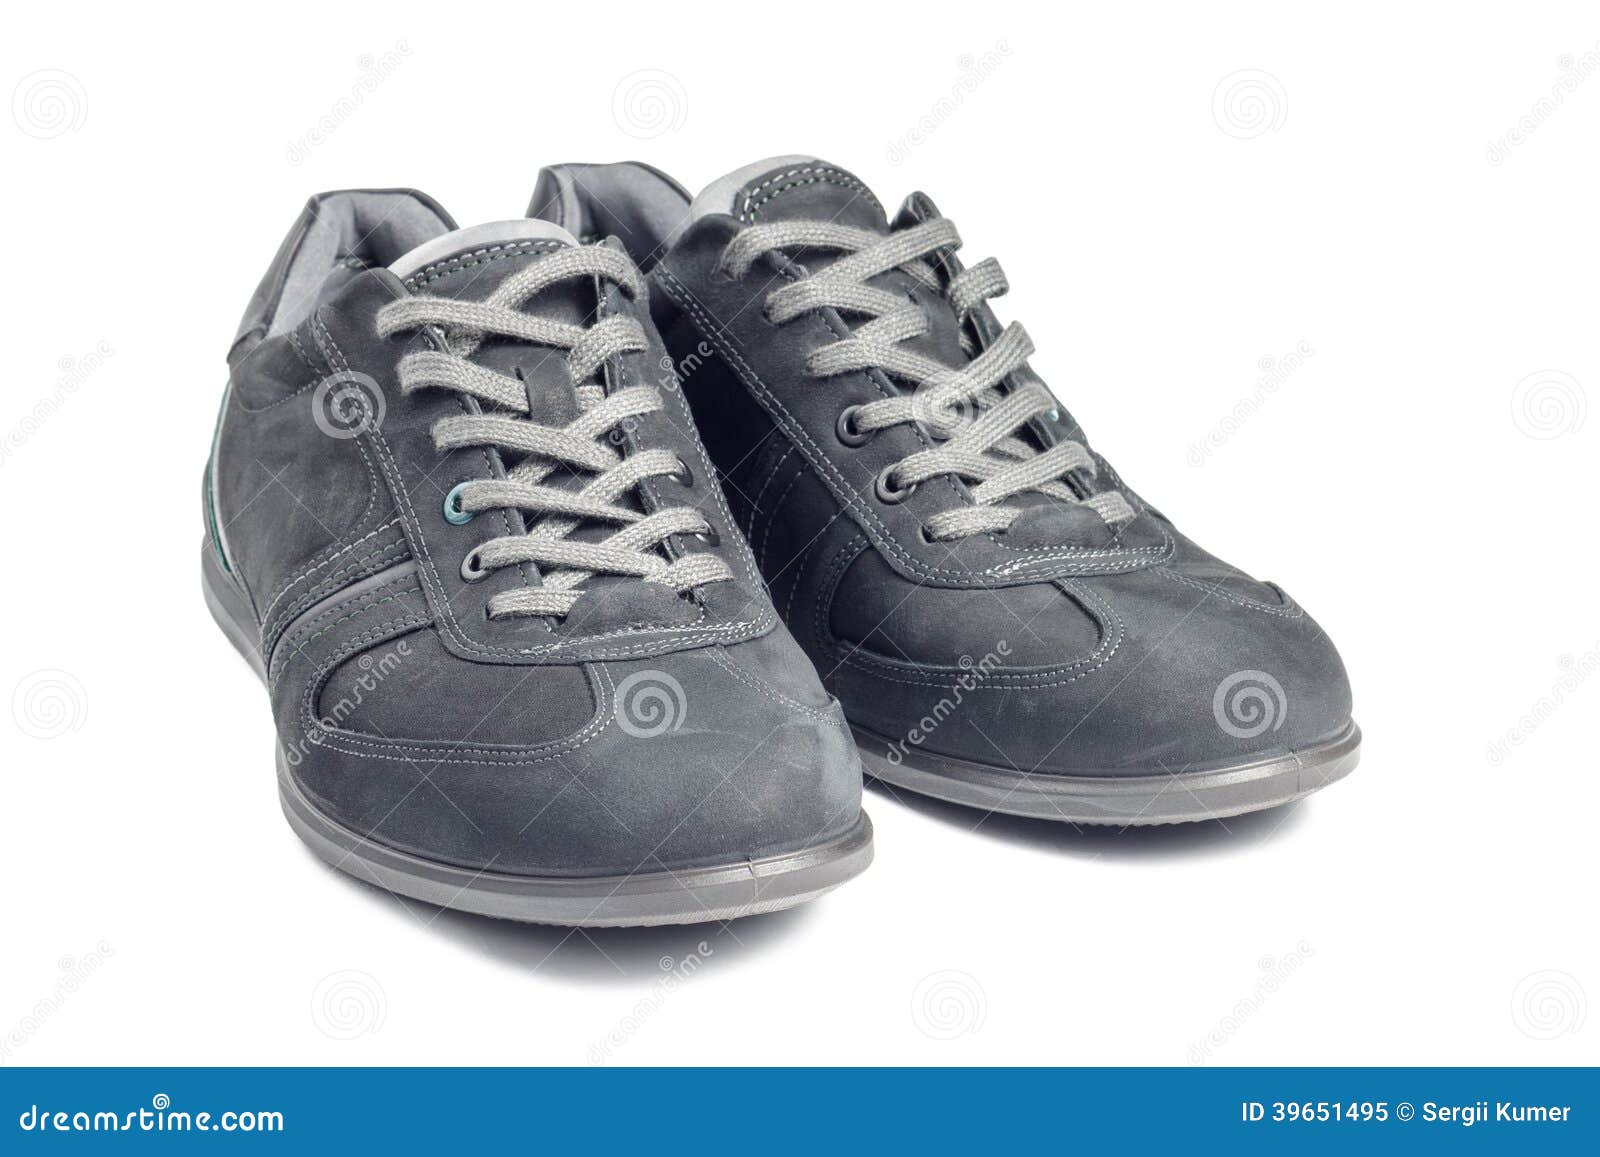 Pair of Men S Shoes Isolated on White Background Stock Image - Image of ...